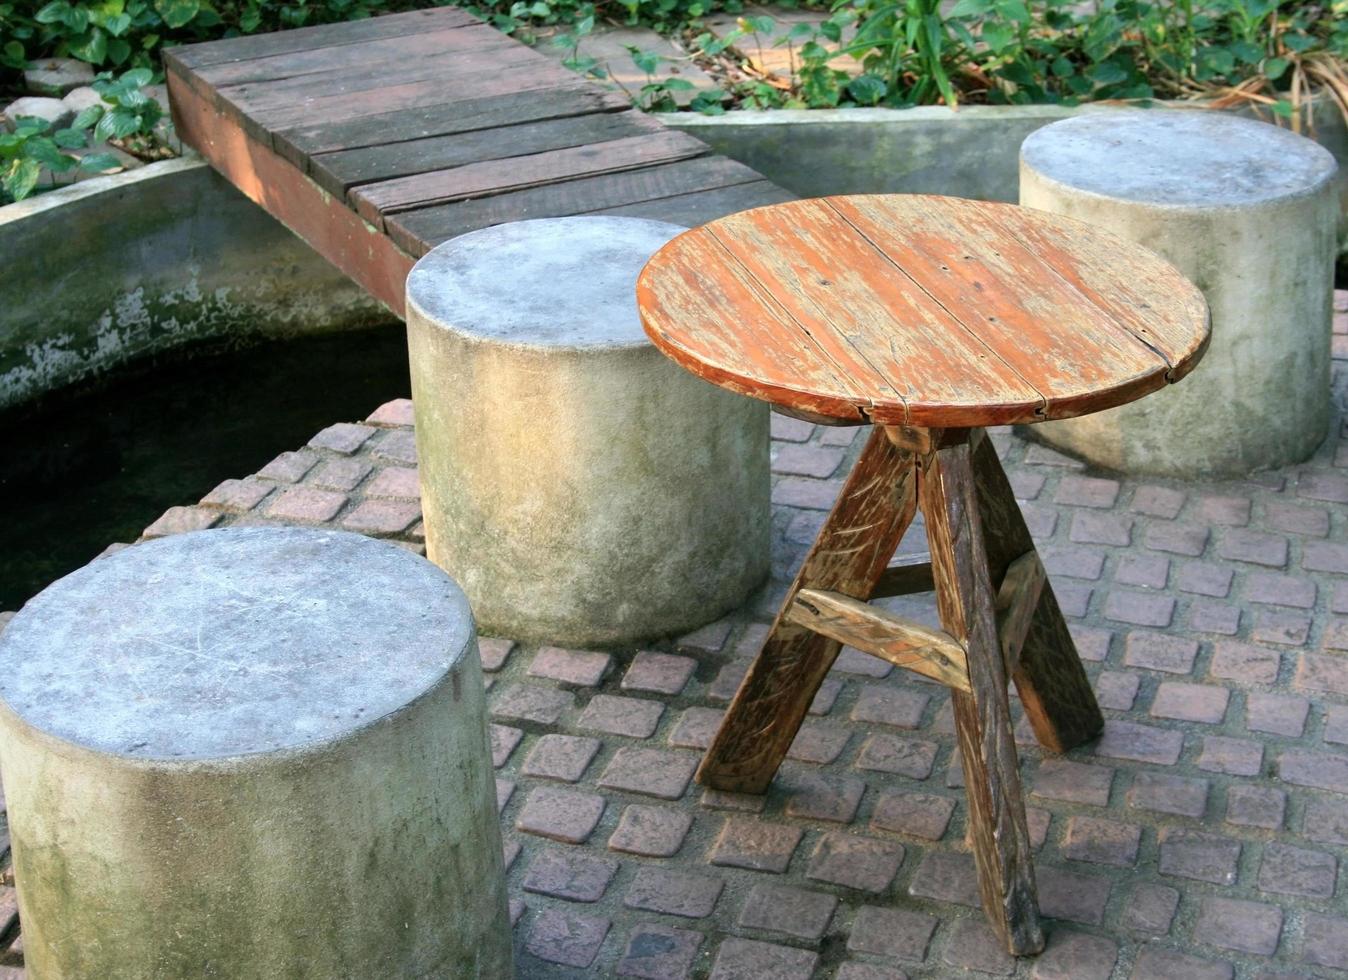 Spain, 2020 - Wooden table and cement chairs photo